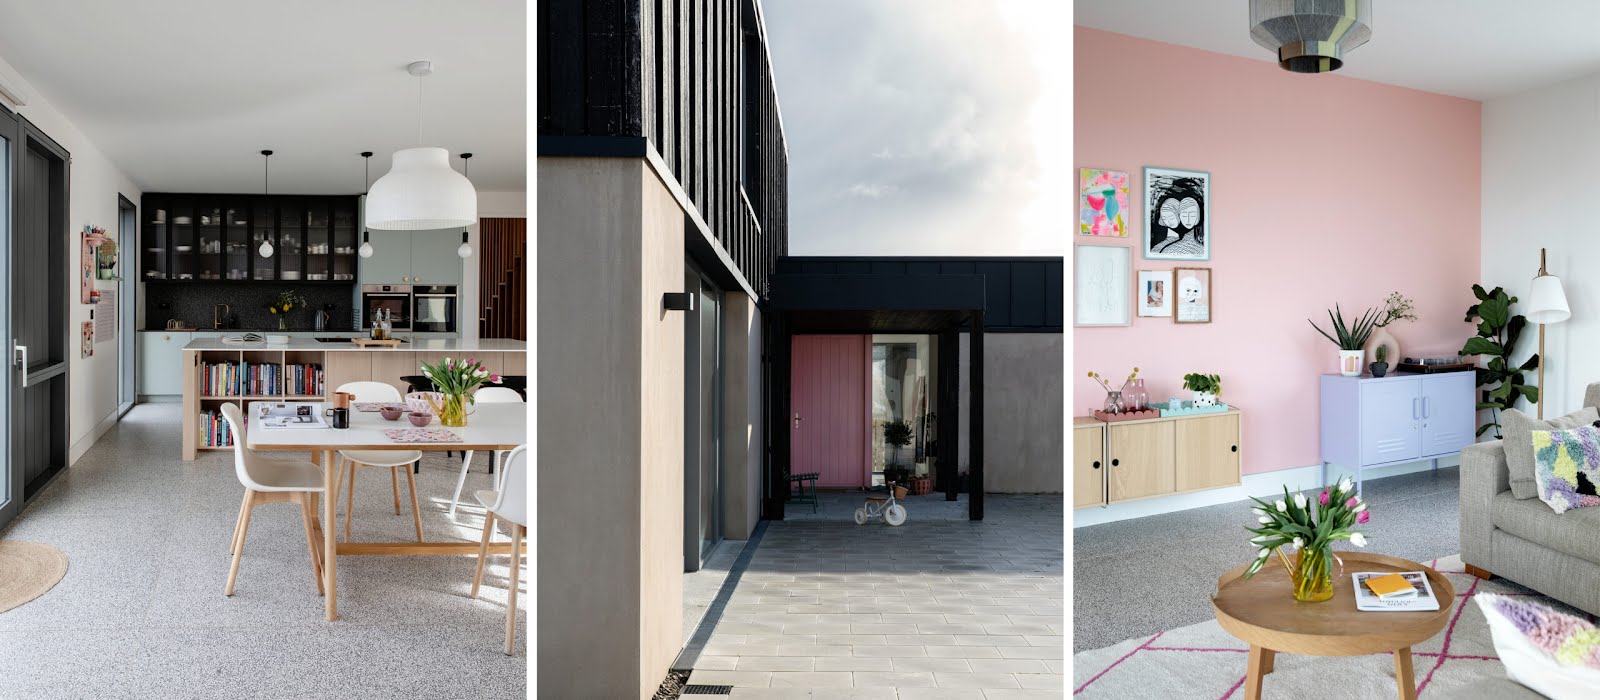 A Derry home, full of personality and touches of fun, proves the power of embracing colour